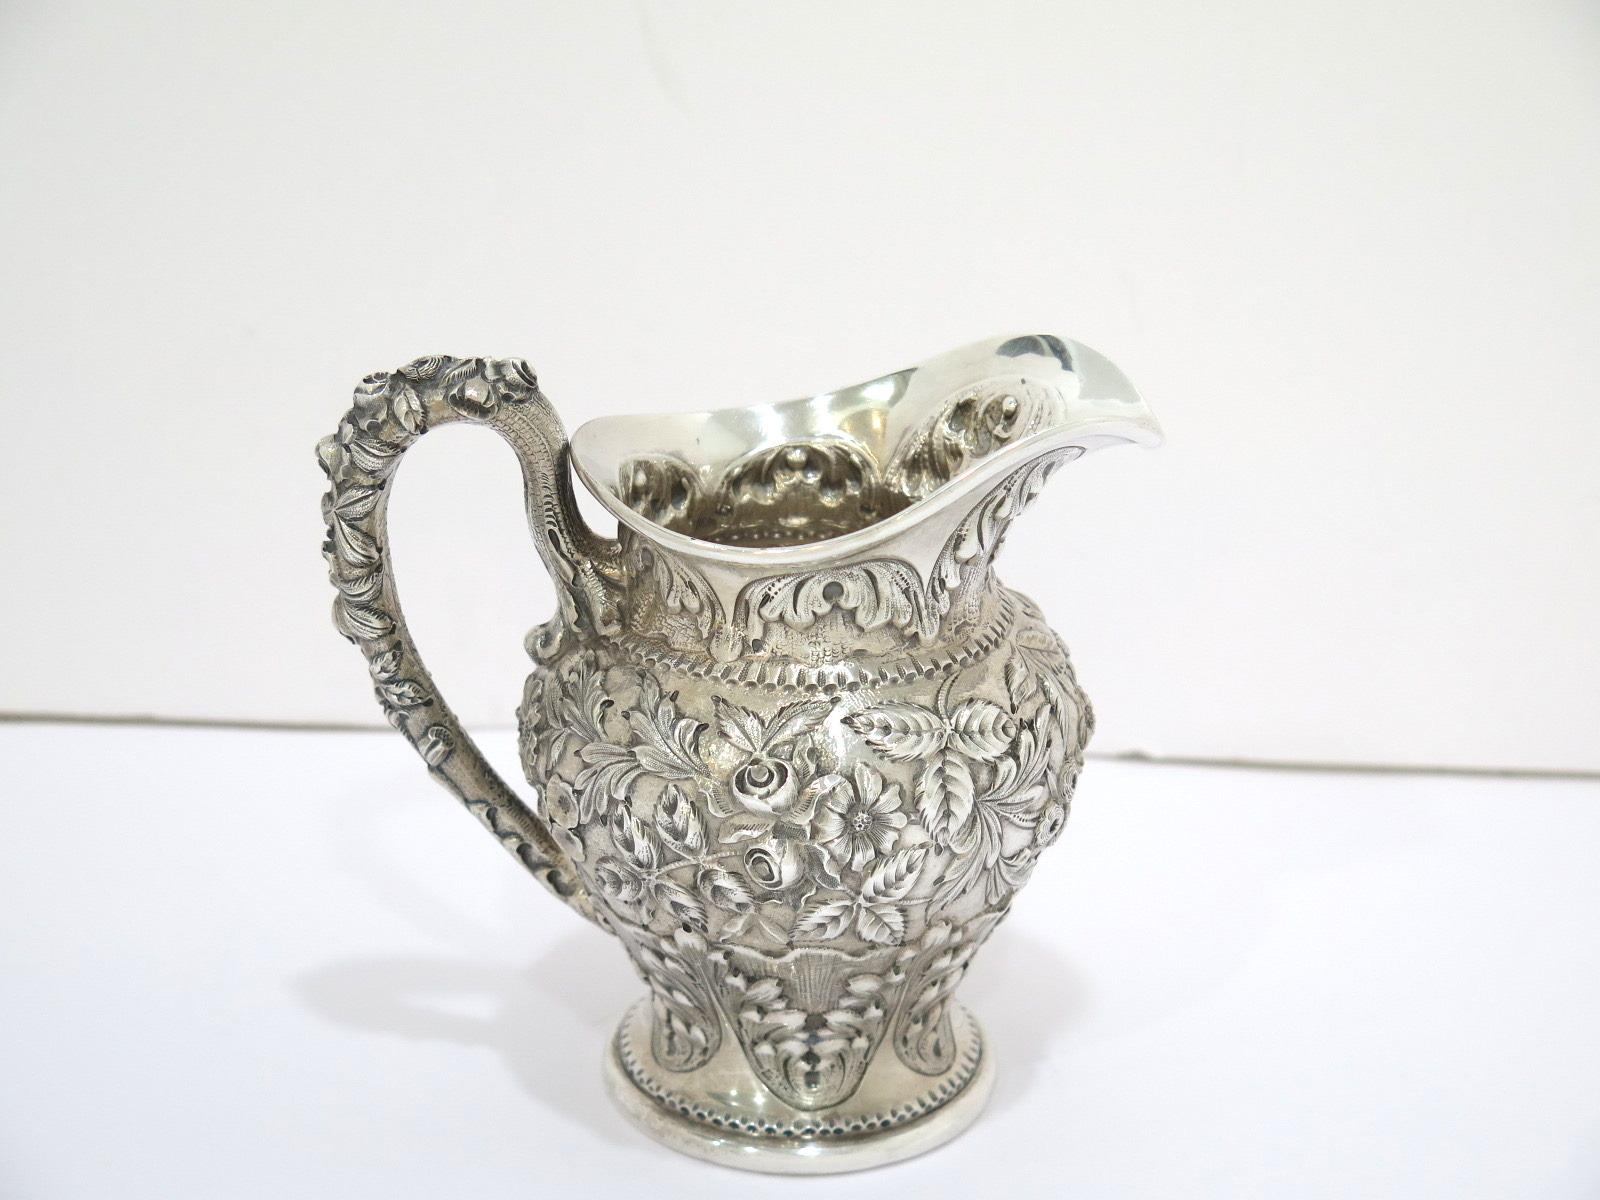 5 Pc Sterling Silver S. Kirk & Son Antique Floral Repousse Tea / Coffee Service For Sale 4